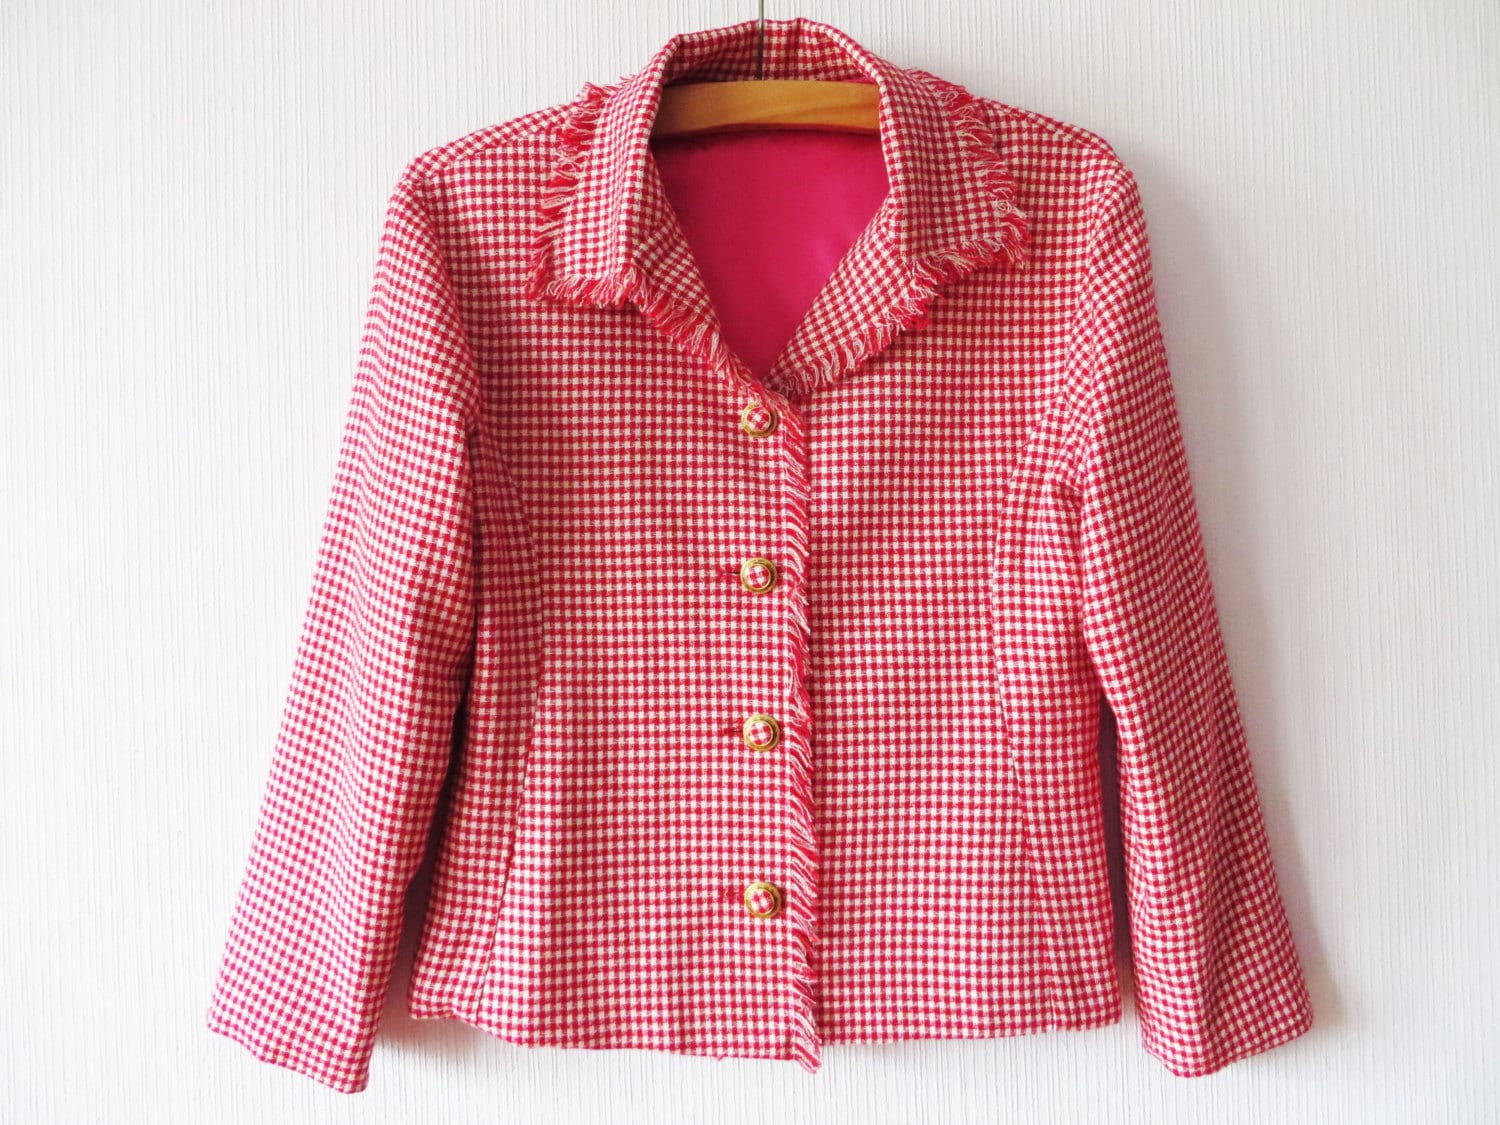 Aliexpress.com : Buy New Tweed Worsted Gingham Checkered